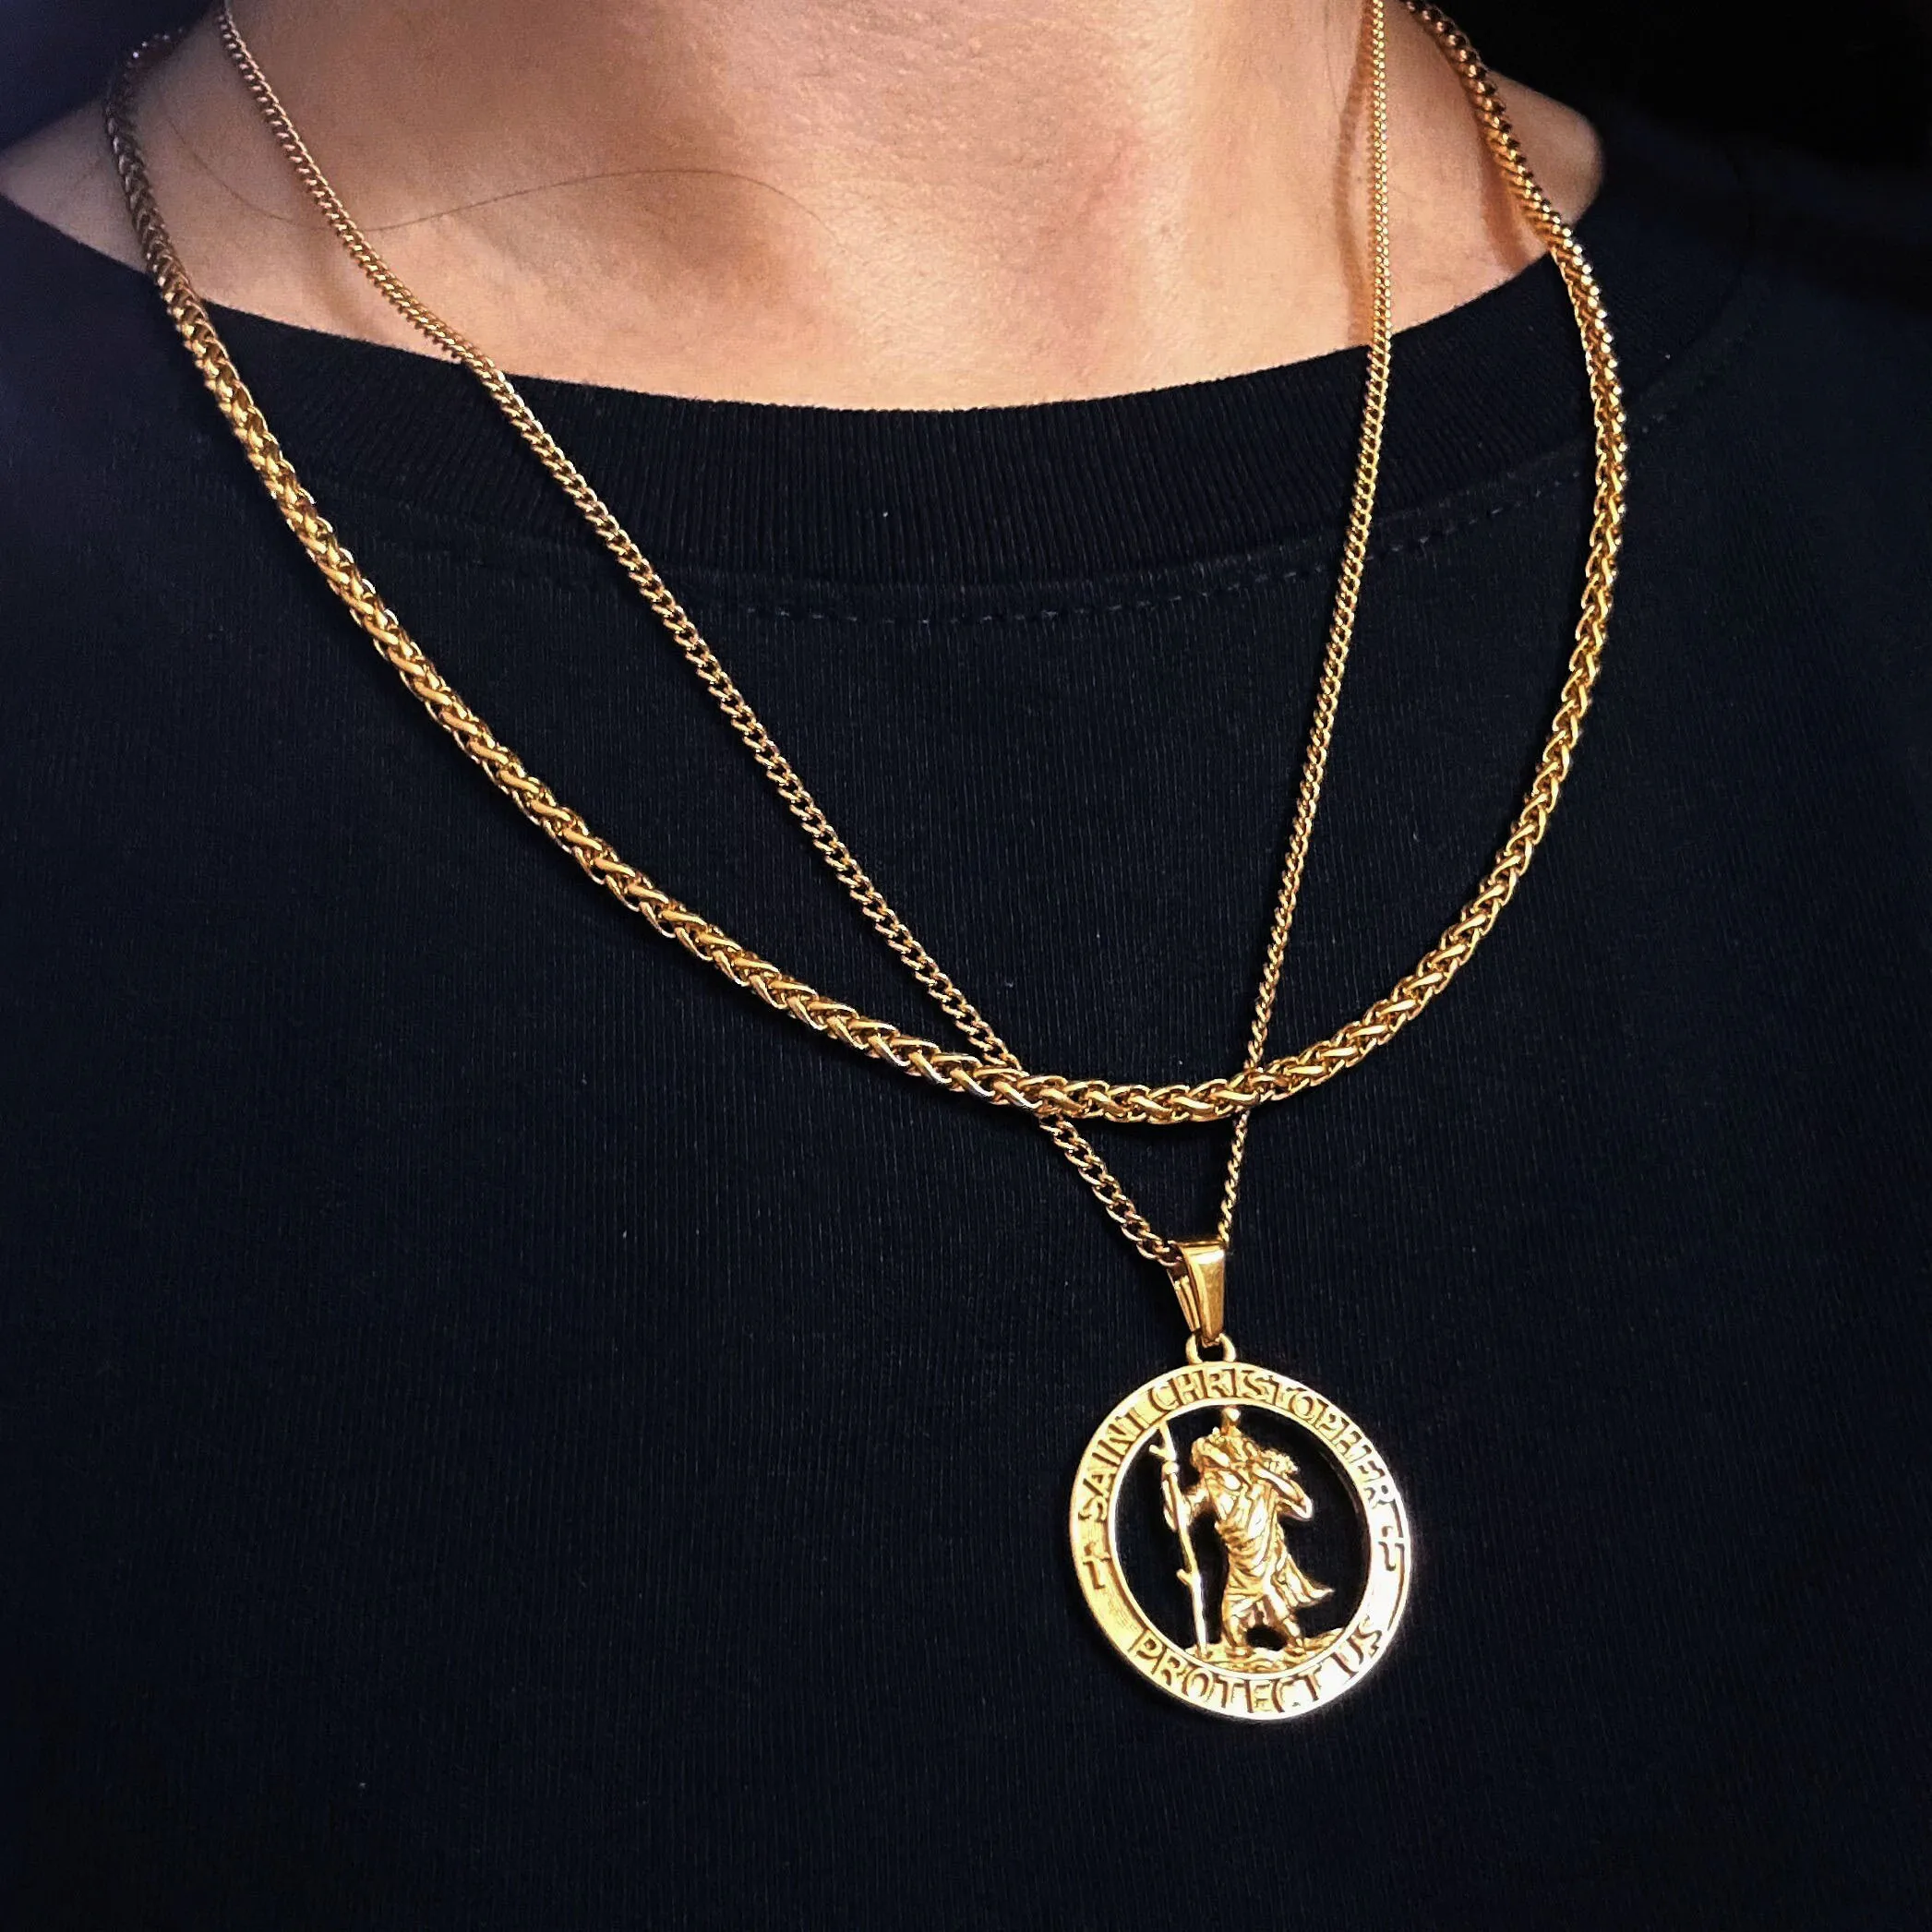 

18k Gold St Christopher Layered Set North Star Pendant Chain Necklace Gold Compass Pendant Rose Cross Necklace Gift For Men